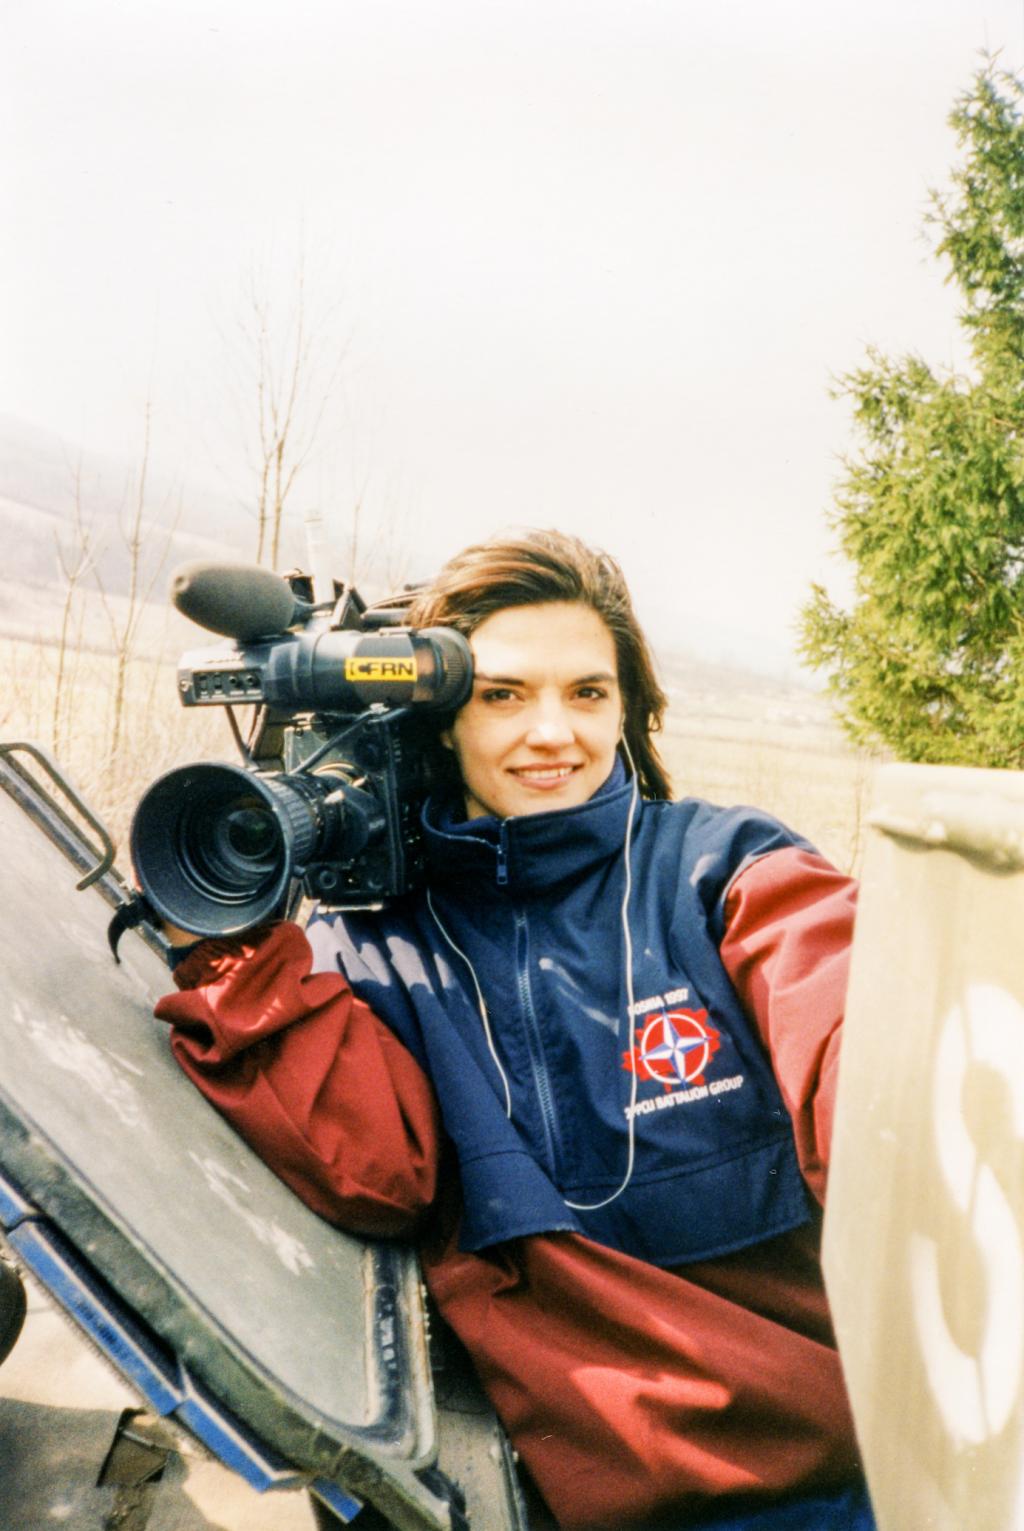 A woman smiles at the camera while holding a television camera on her right shoulder.